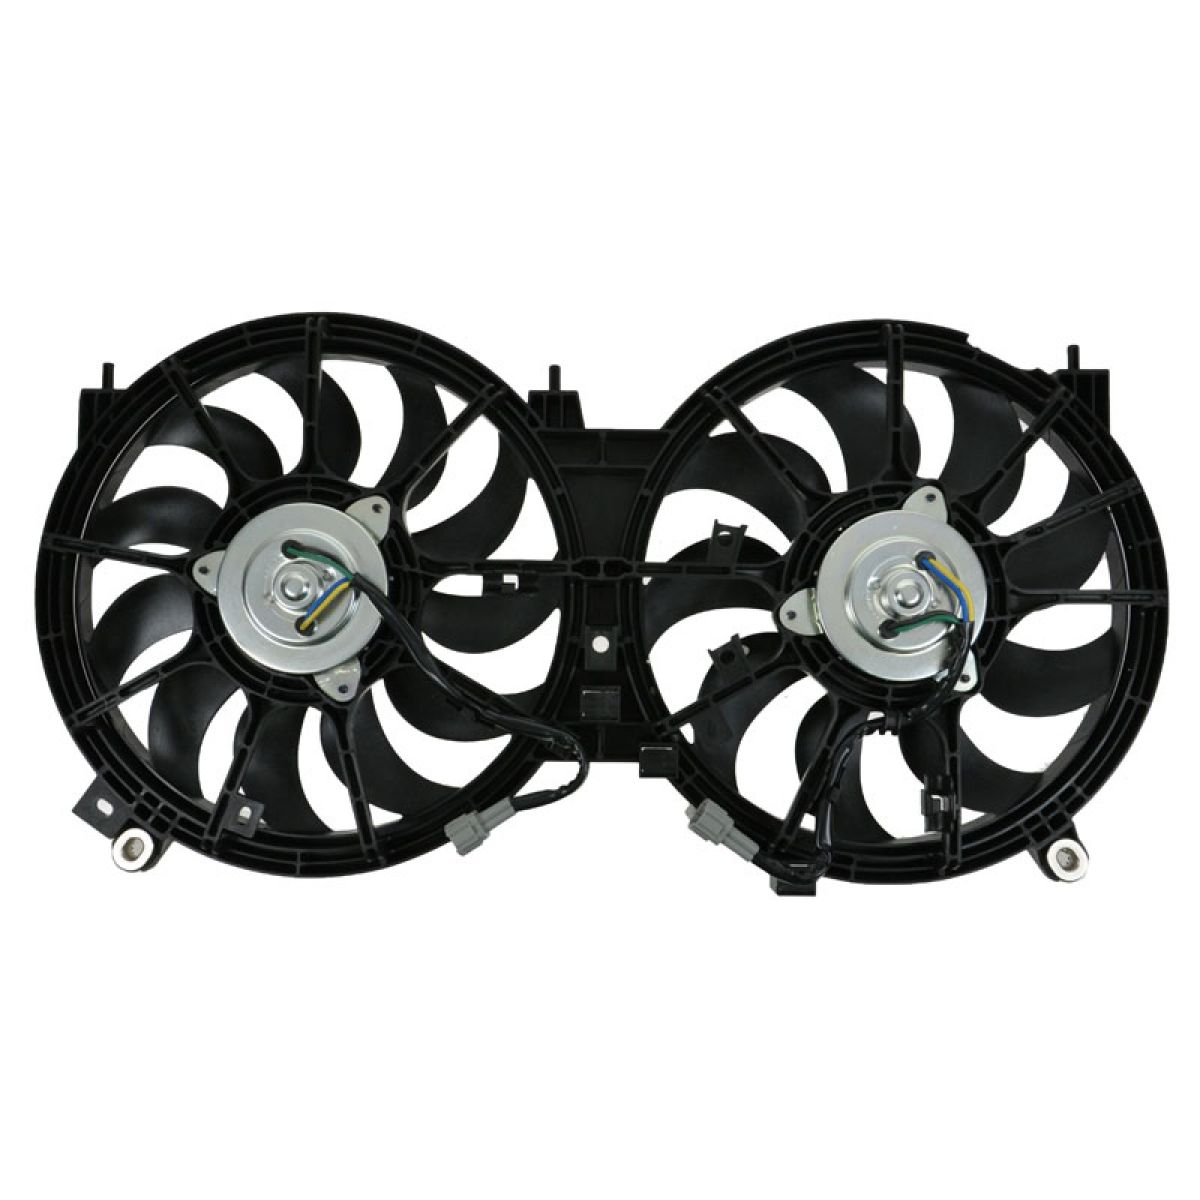 New Radiator Cooling & A/c Fan For Nissan Murano 09-14 Quest 11-15 V6 3.5l